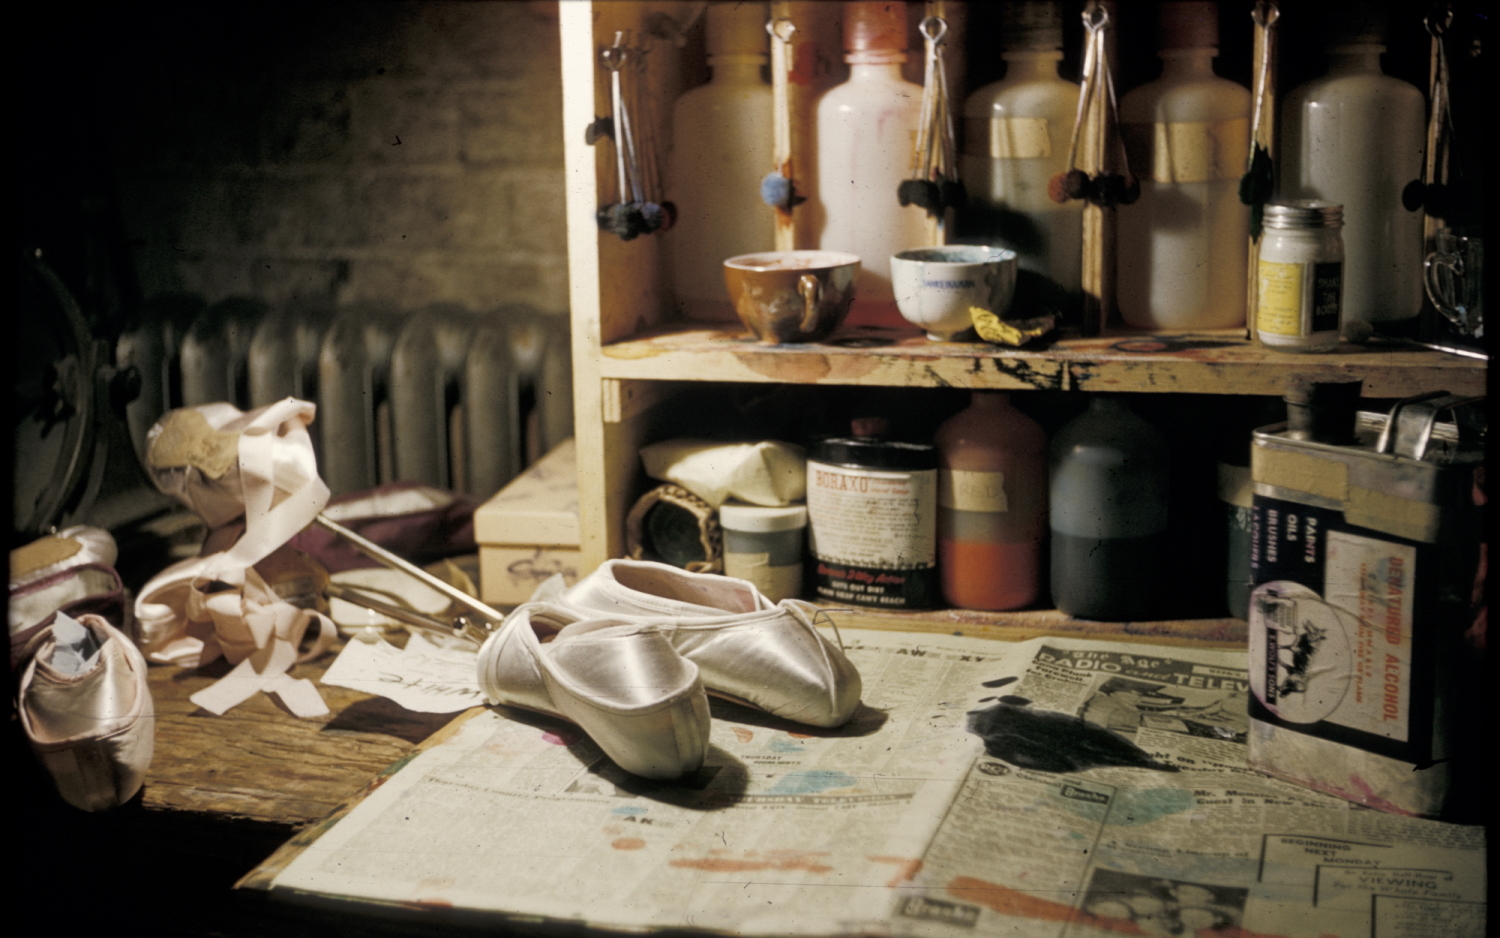 Ballet slippers sit on a workshop table in front of a cupboard with craft materials.